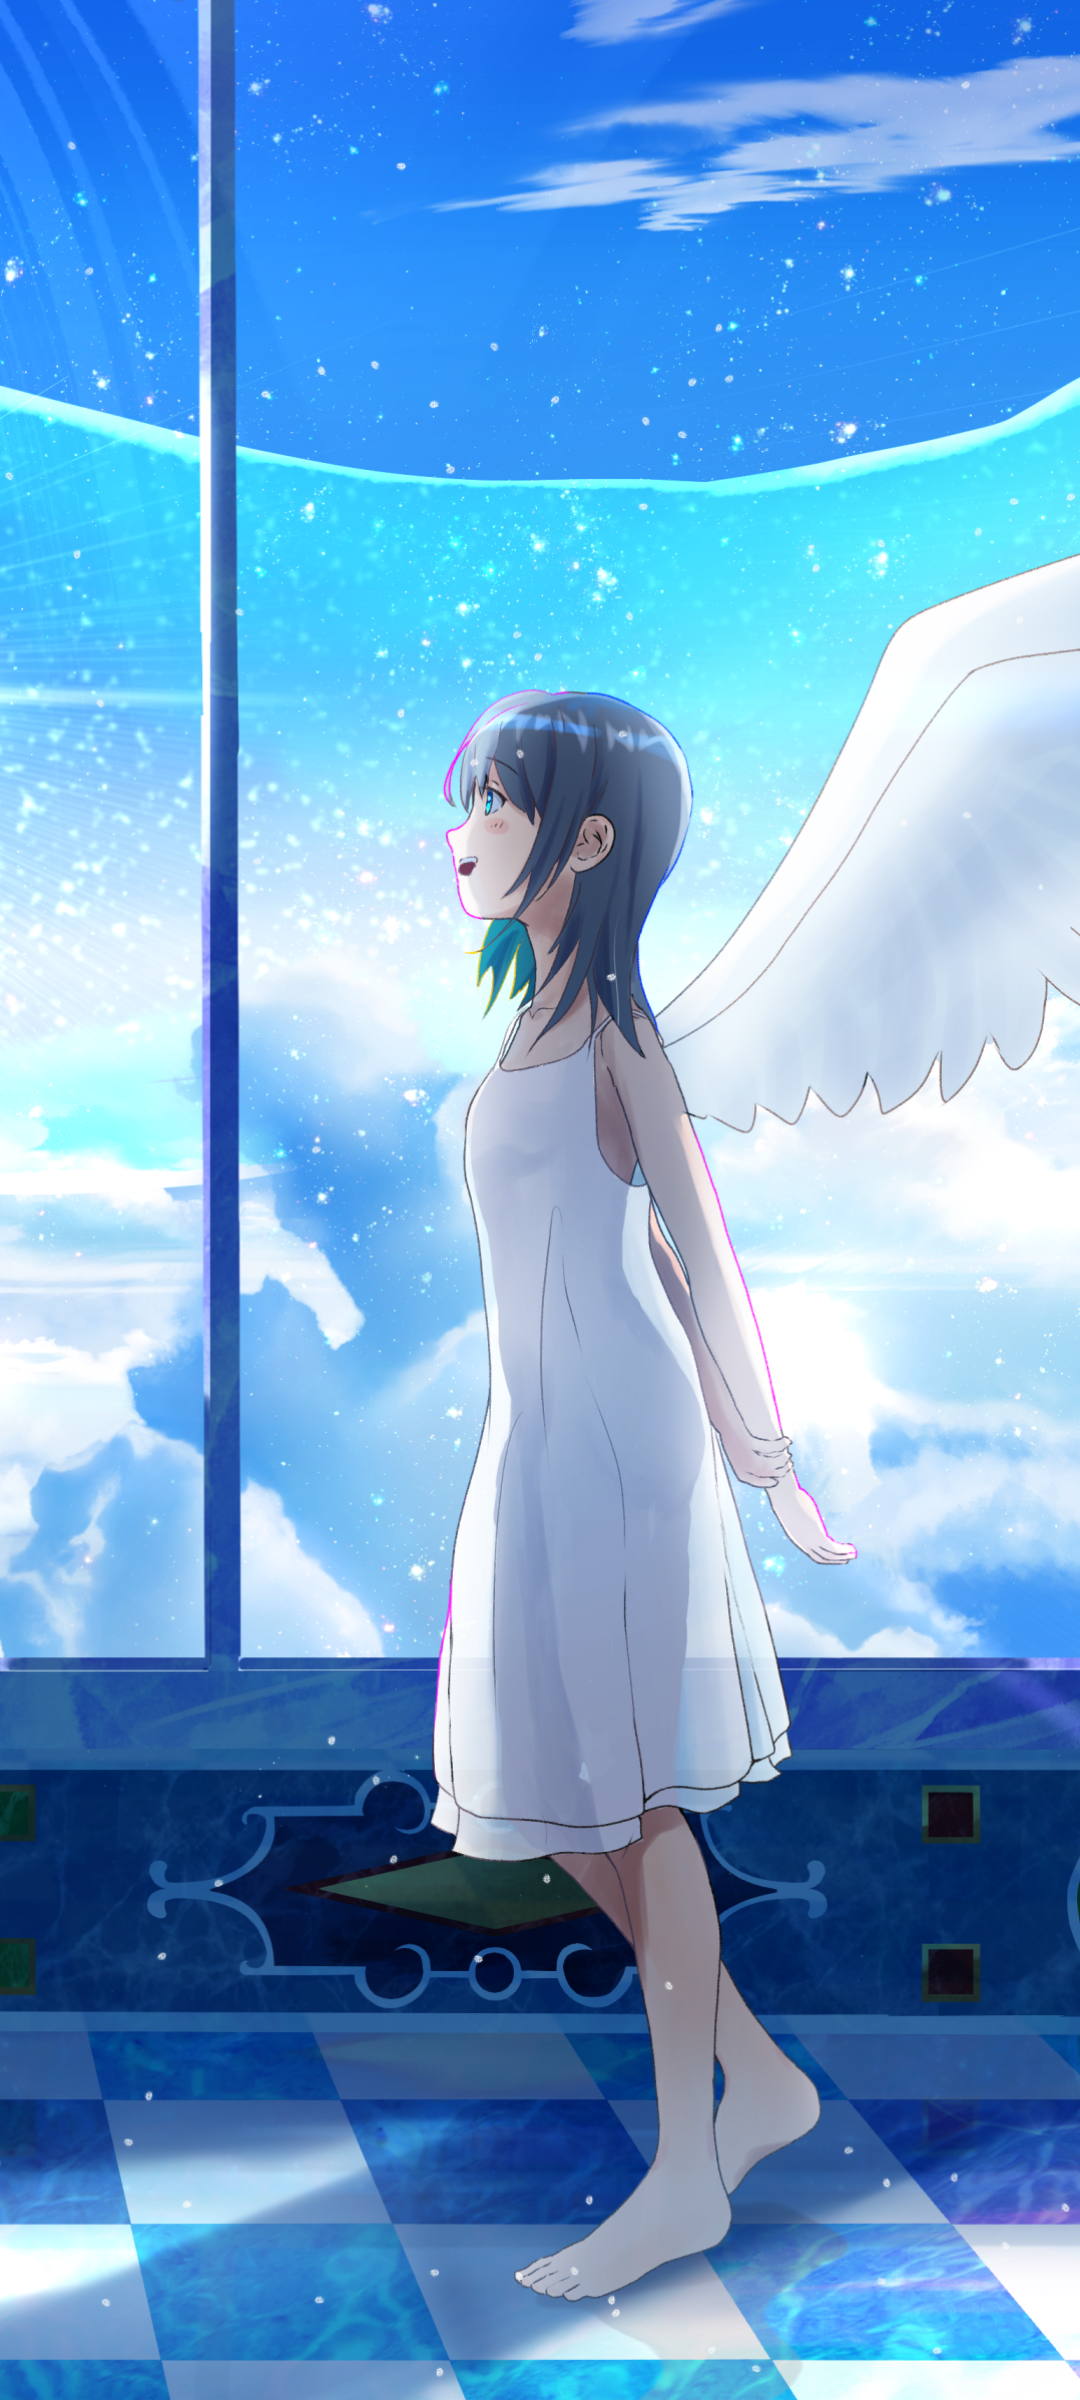 Mobile wallpaper: Anime, Angel, 1344381 download the picture for free.